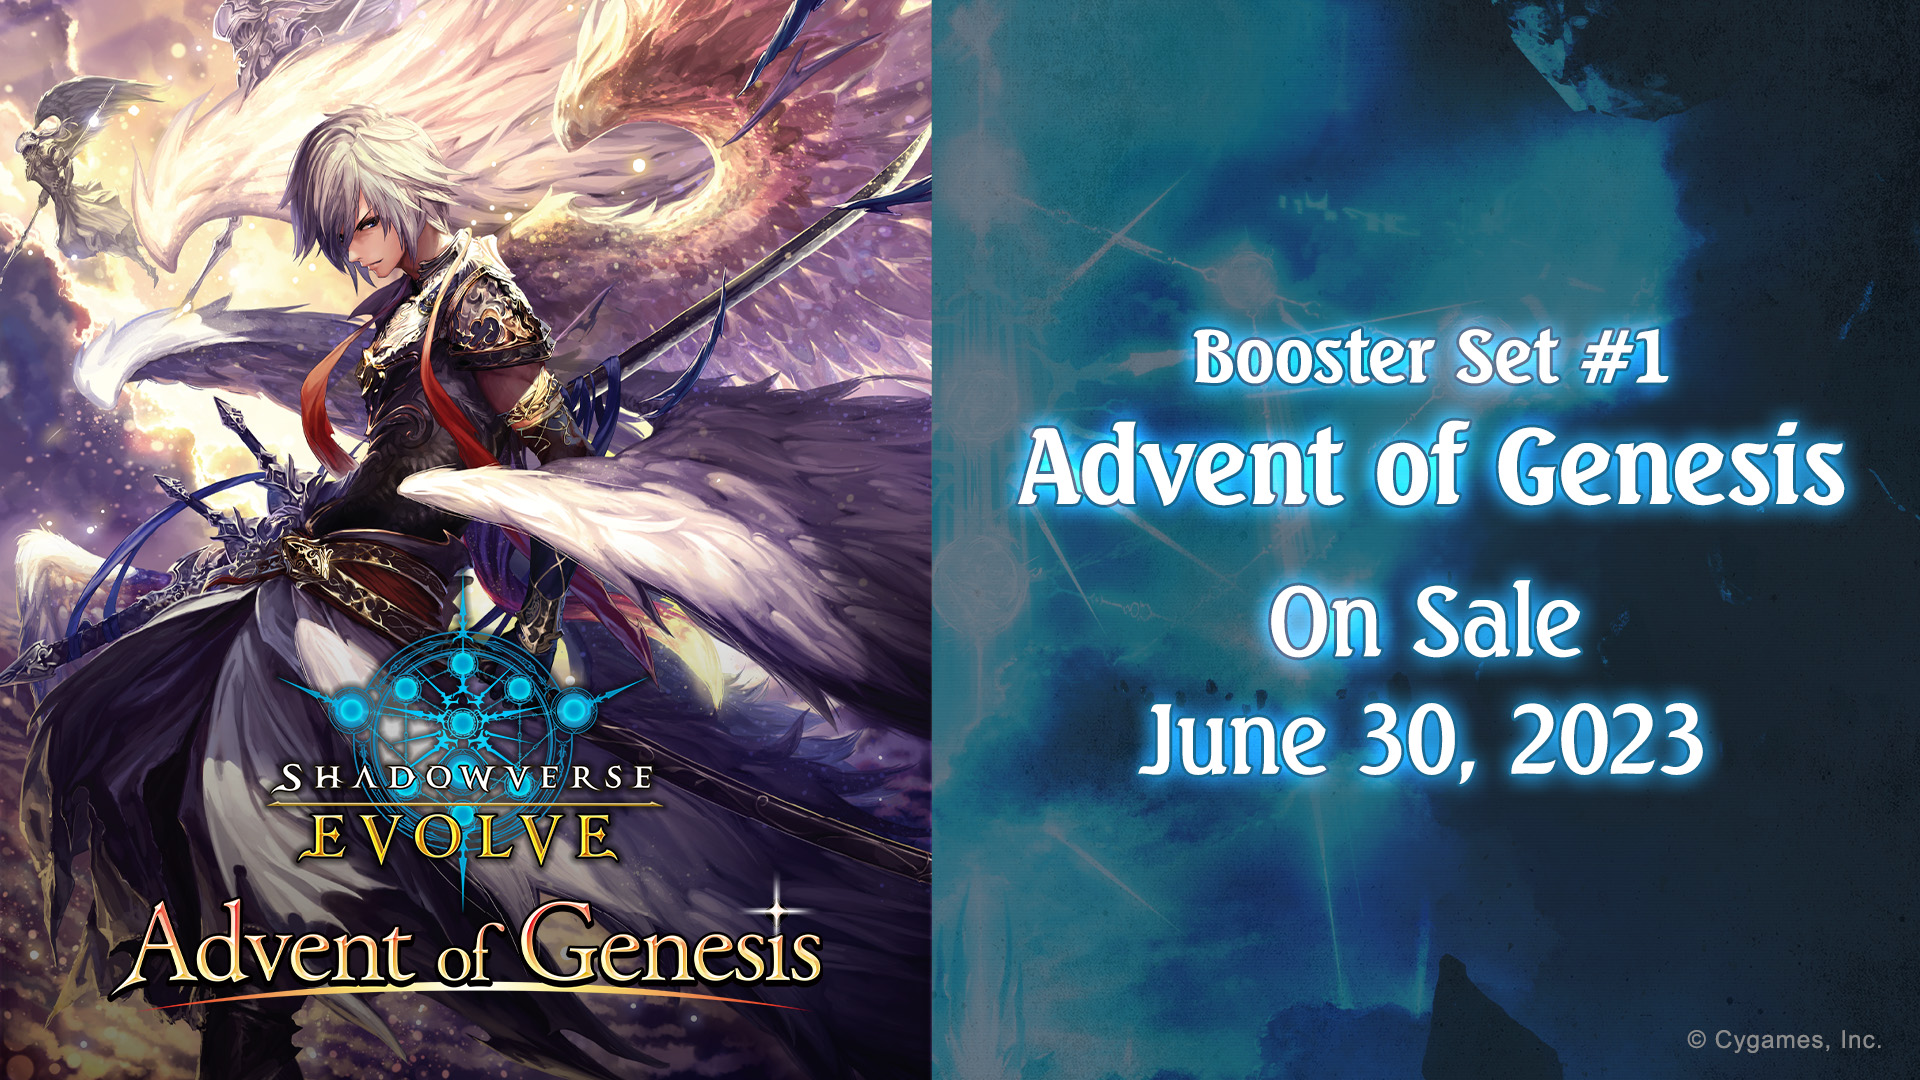 Booster Set #1 “Advent of Genesis”